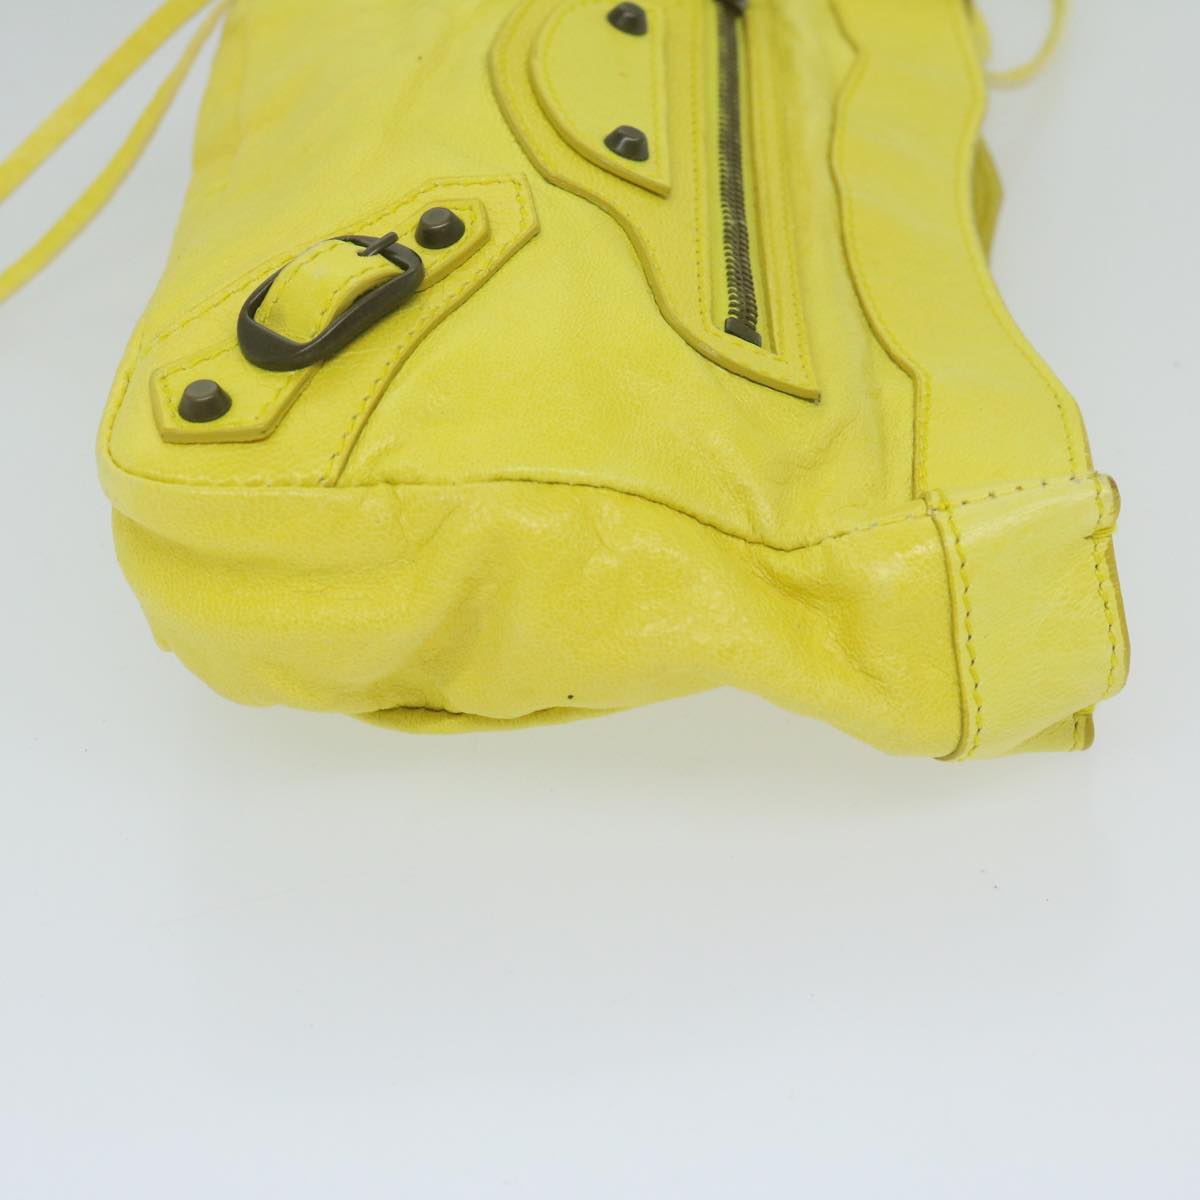 Balenciaga Pouch Leather Yellow 110481 Auth Hk944